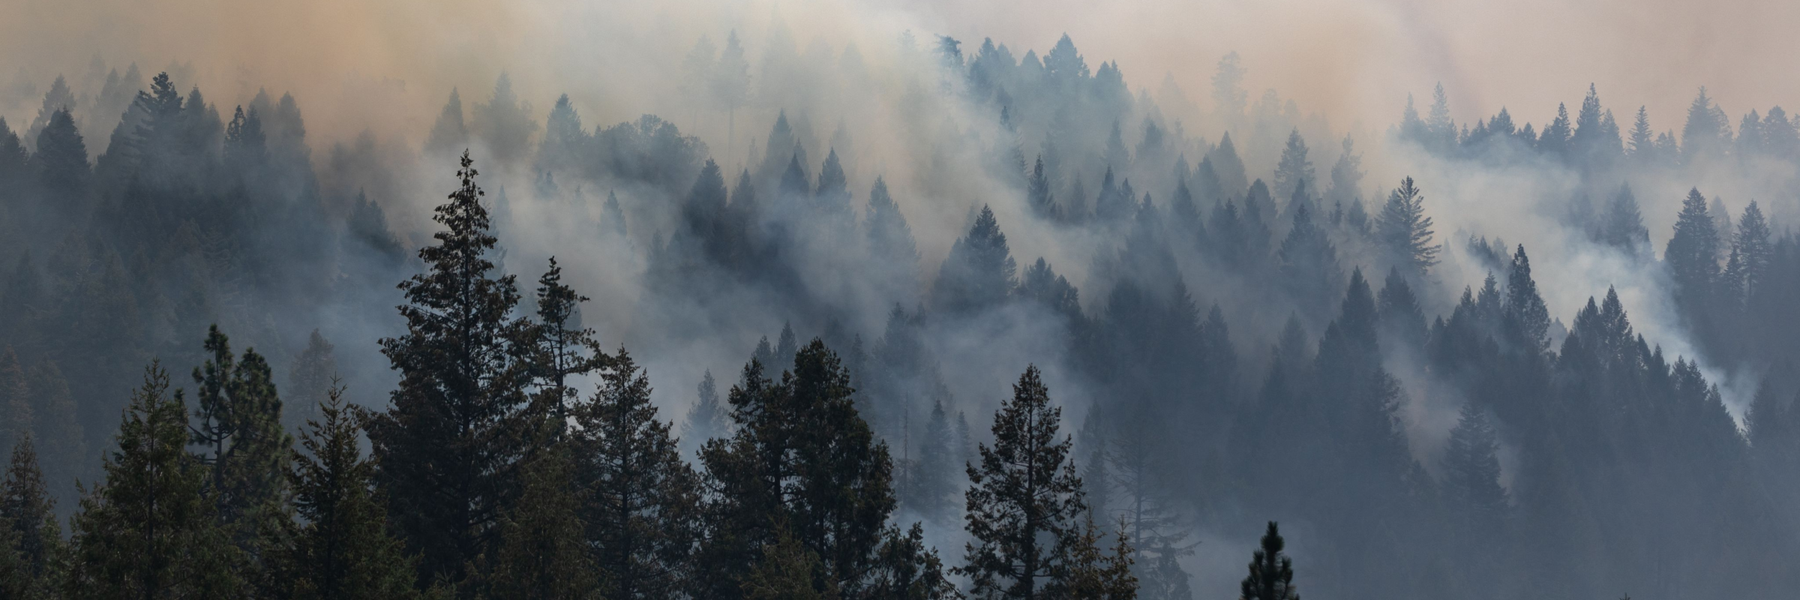 In California, unhealthy pollution from wildfire smoke has become dangerously common